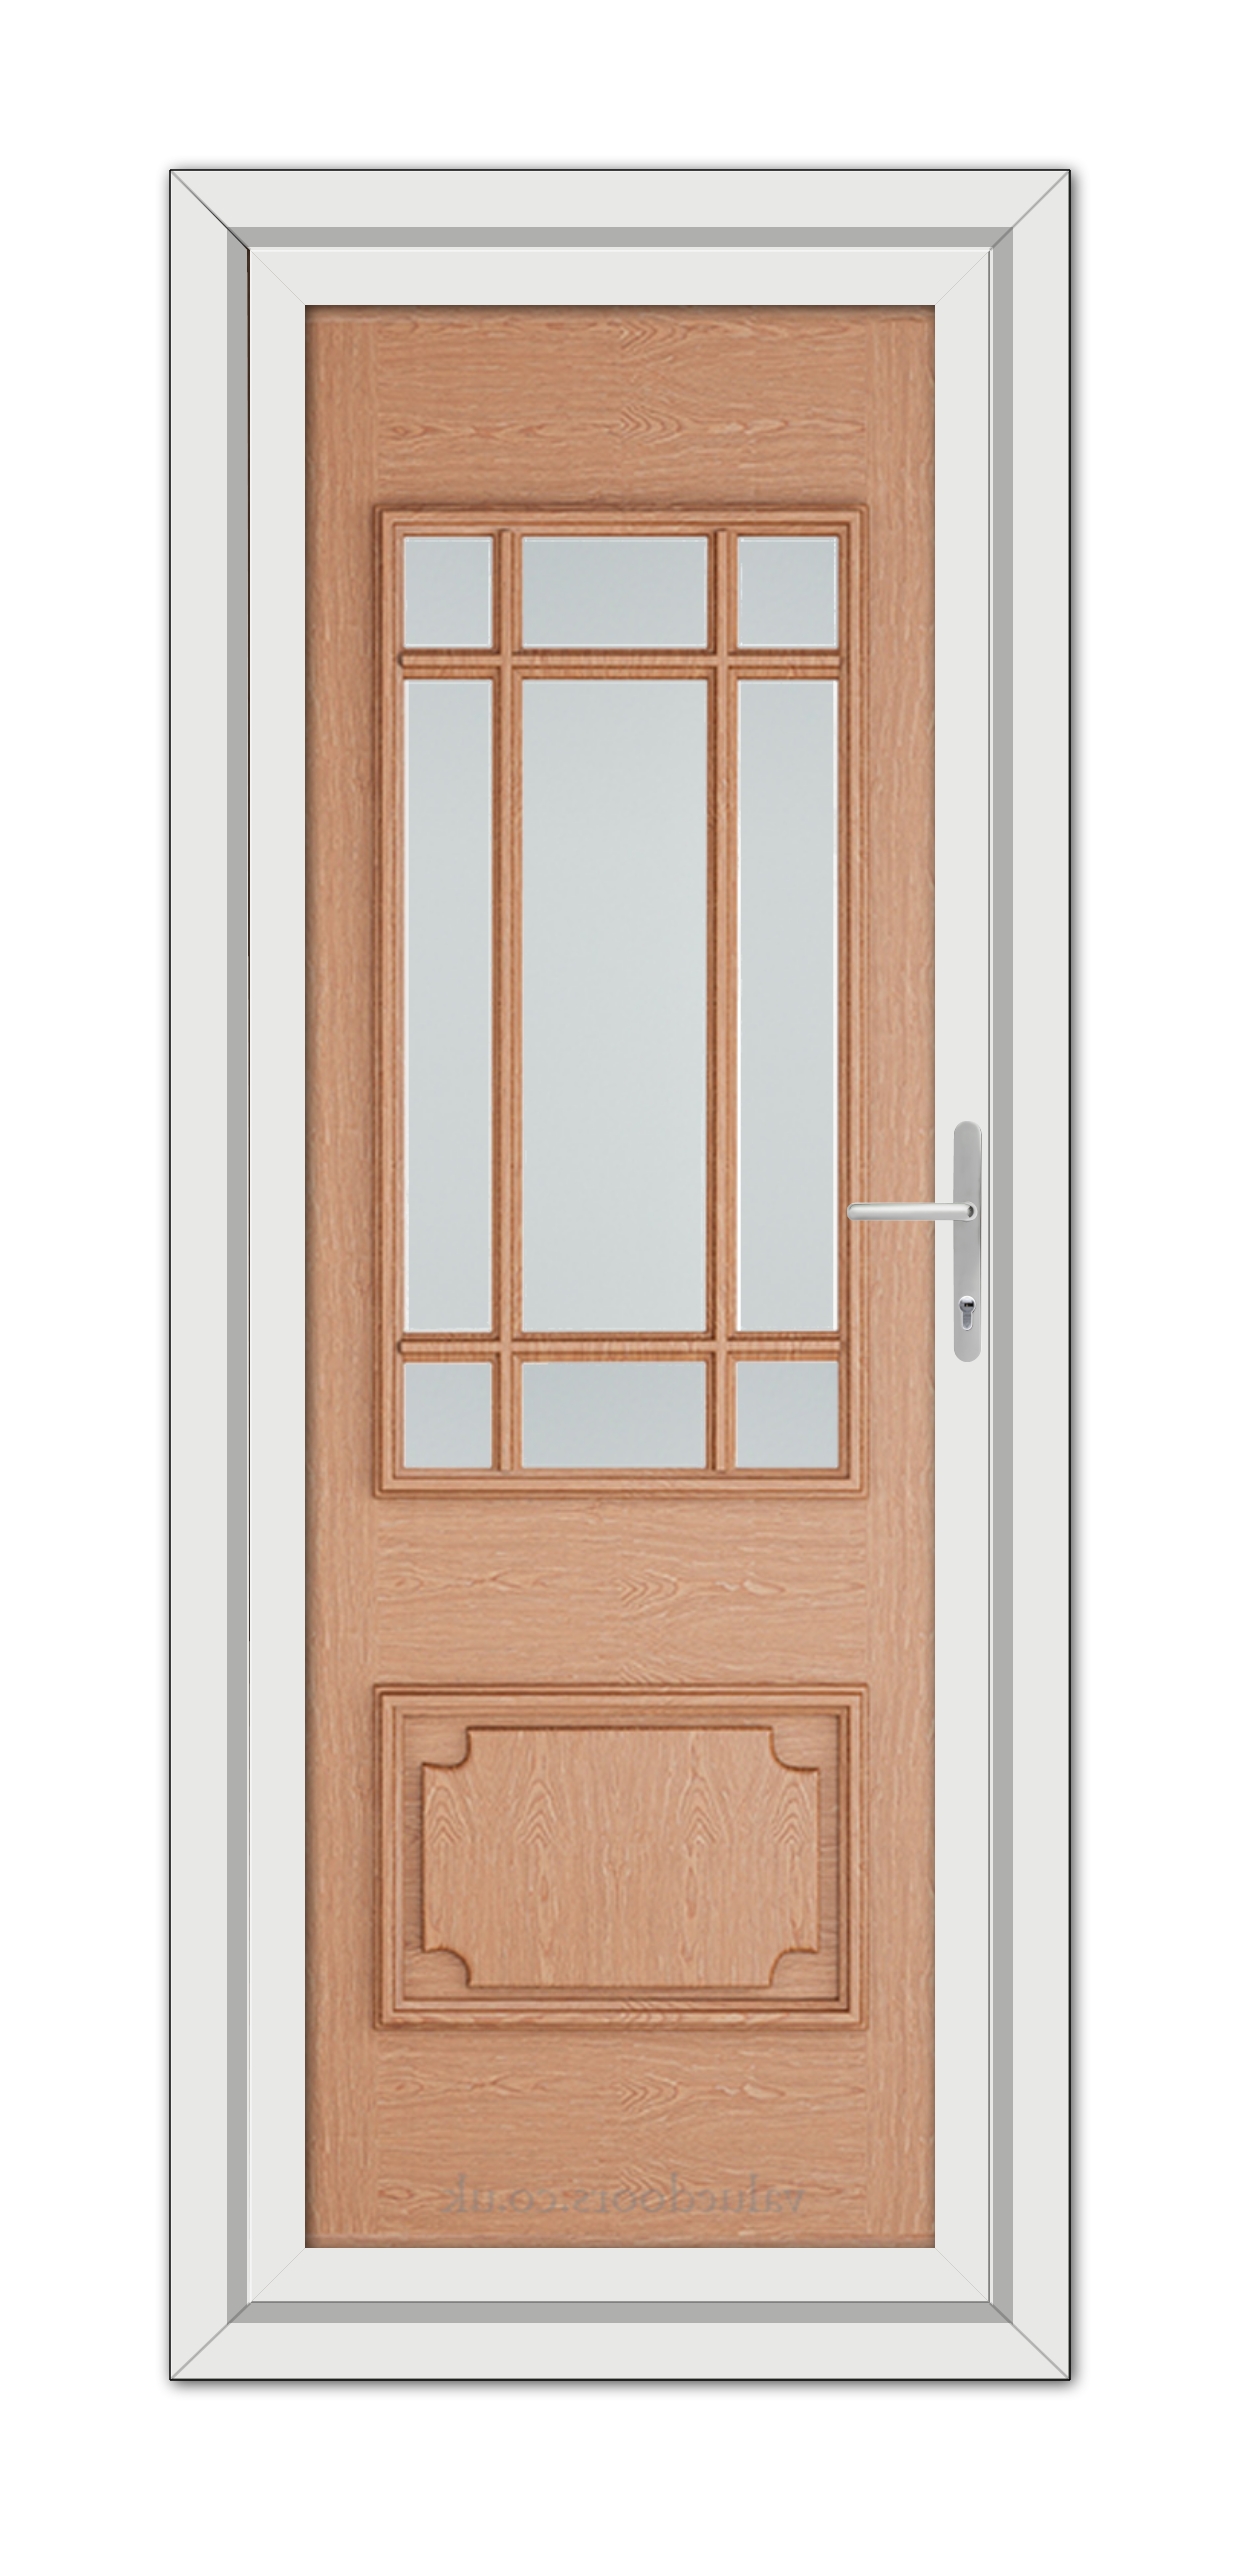 An Irish Oak Seville uPVC Door with glass panels in the upper half, set in a white frame, featuring a metal handle on the right side.